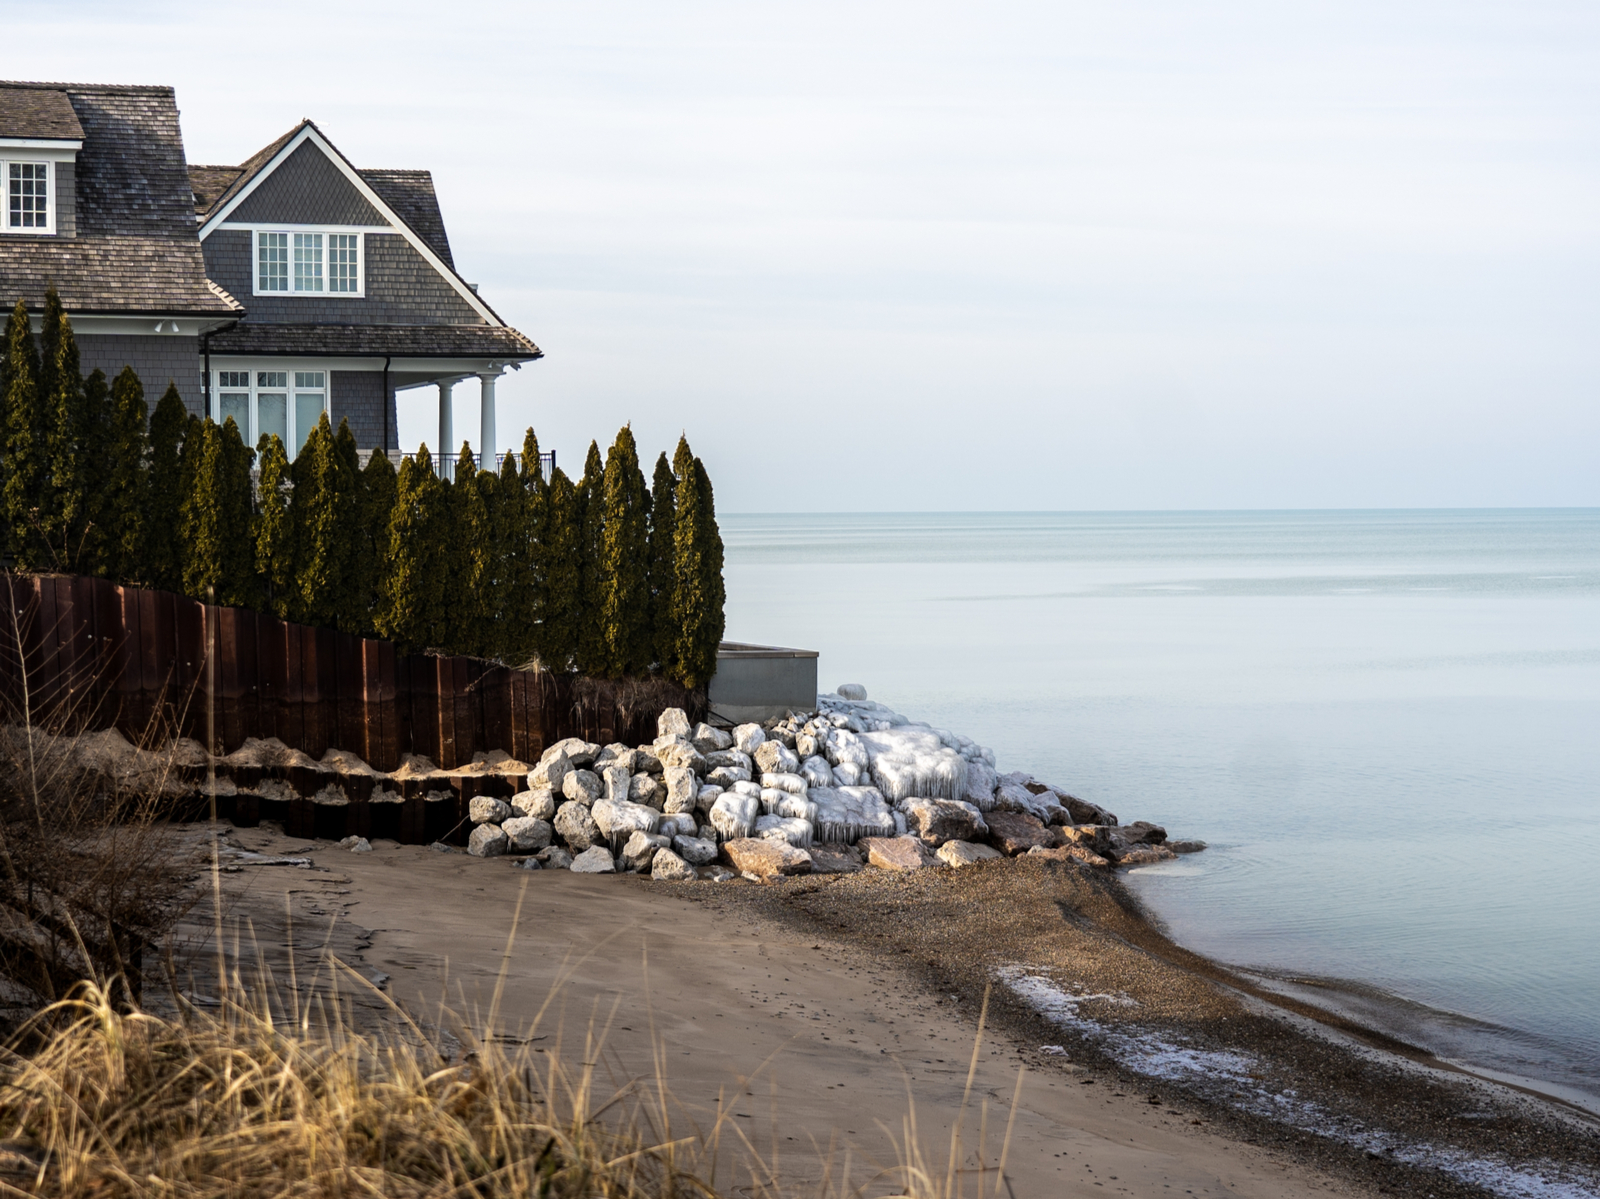 For a piece on the best Airbnb stays in Michigan, a photo of a cabin overlooking Lake Michigan on a cloudy day